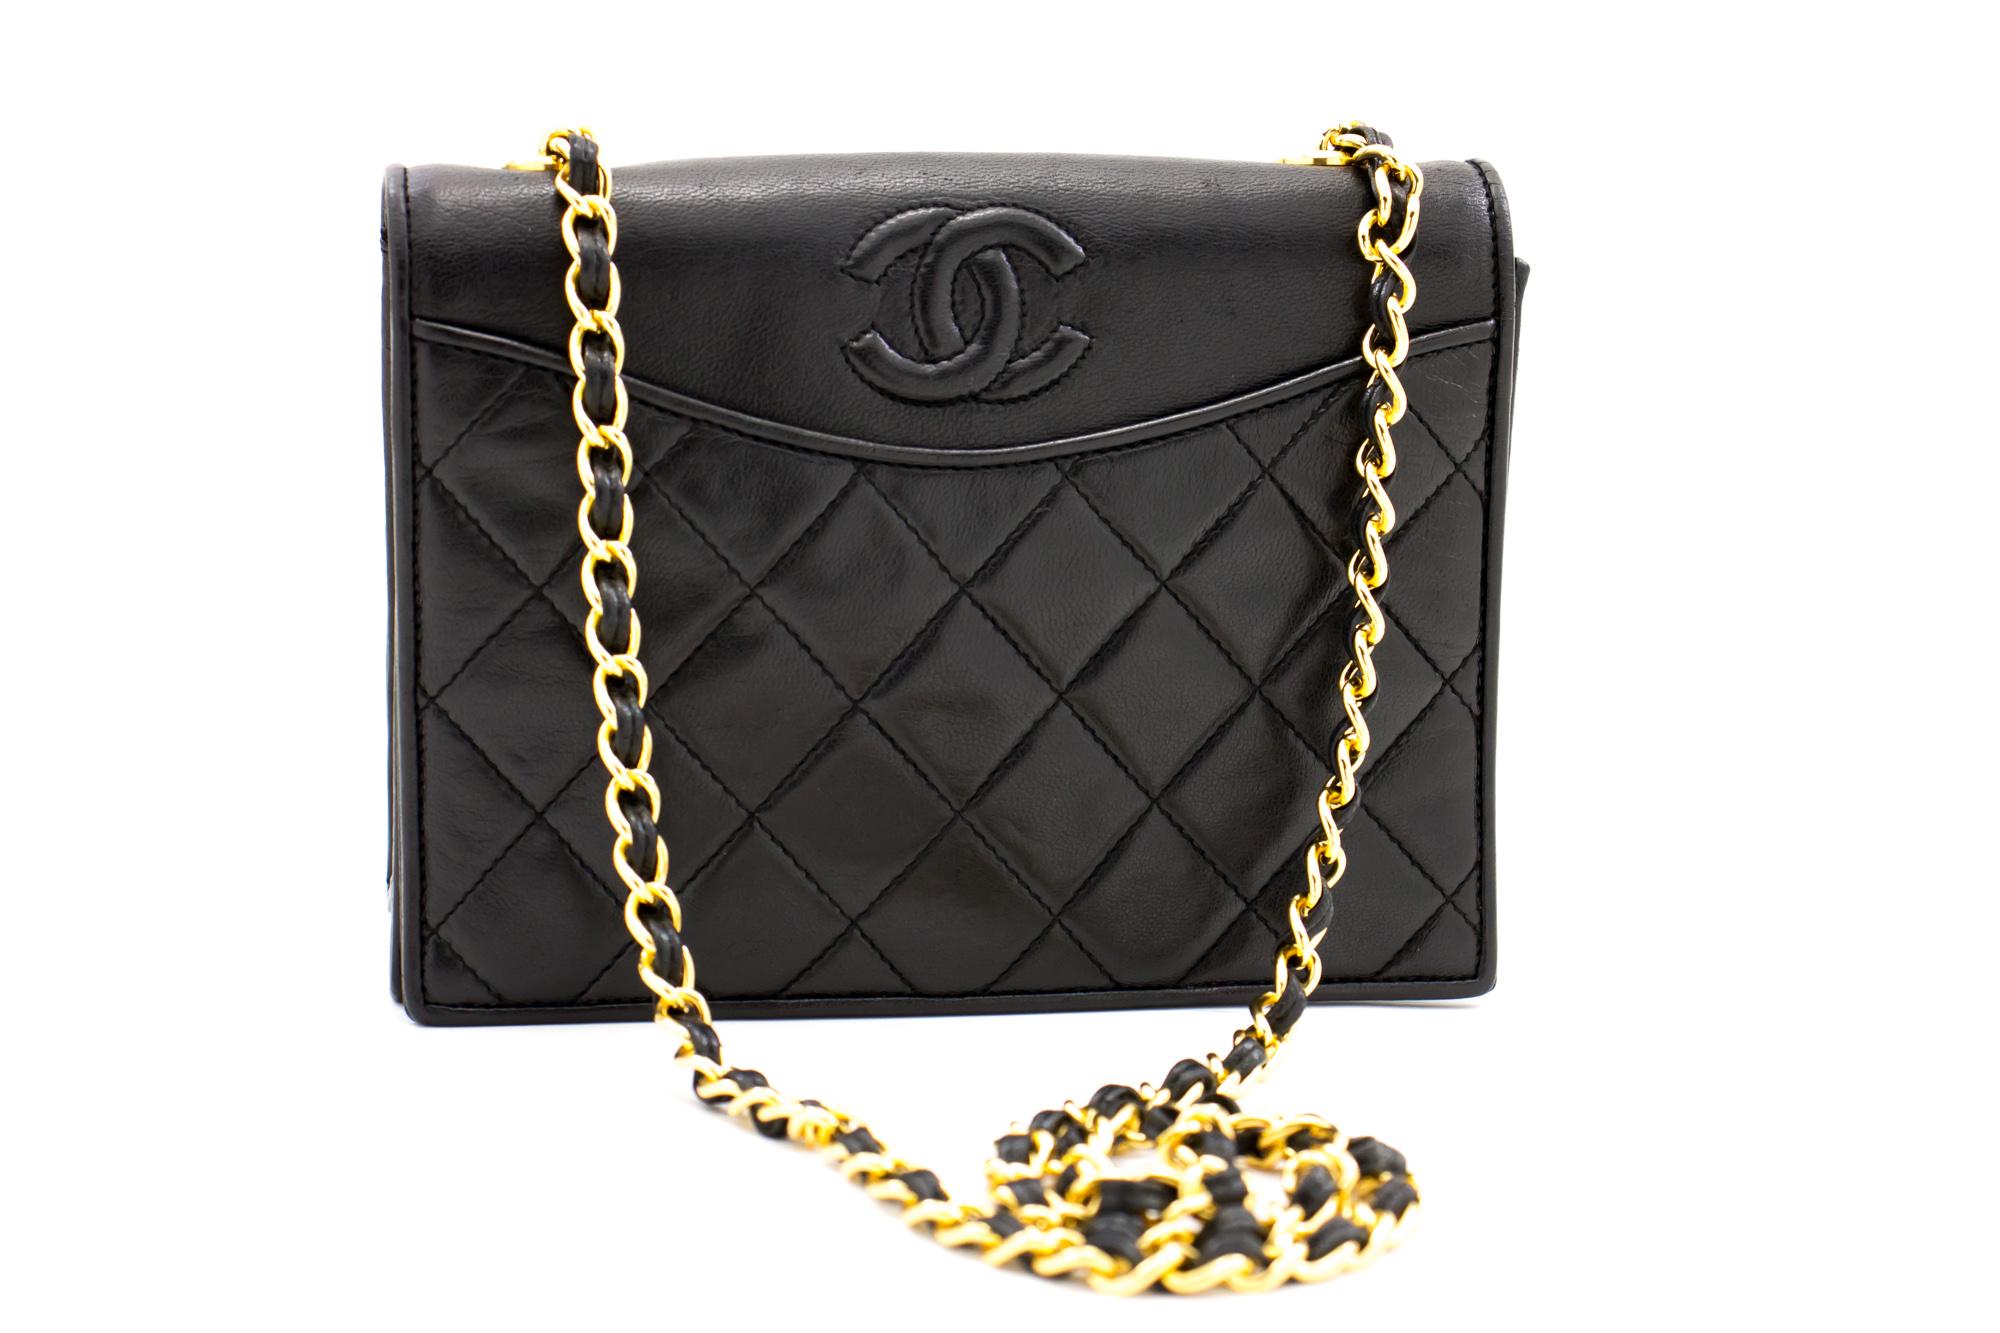 An authentic CHANEL Vintage Classic Chain Shoulder Bag Black Quilted Full Flap. The color is Black. The outside material is Leather. The pattern is Solid. This item is Vintage / Classic. The year of manufacture would be 1989-1991.
Conditions &